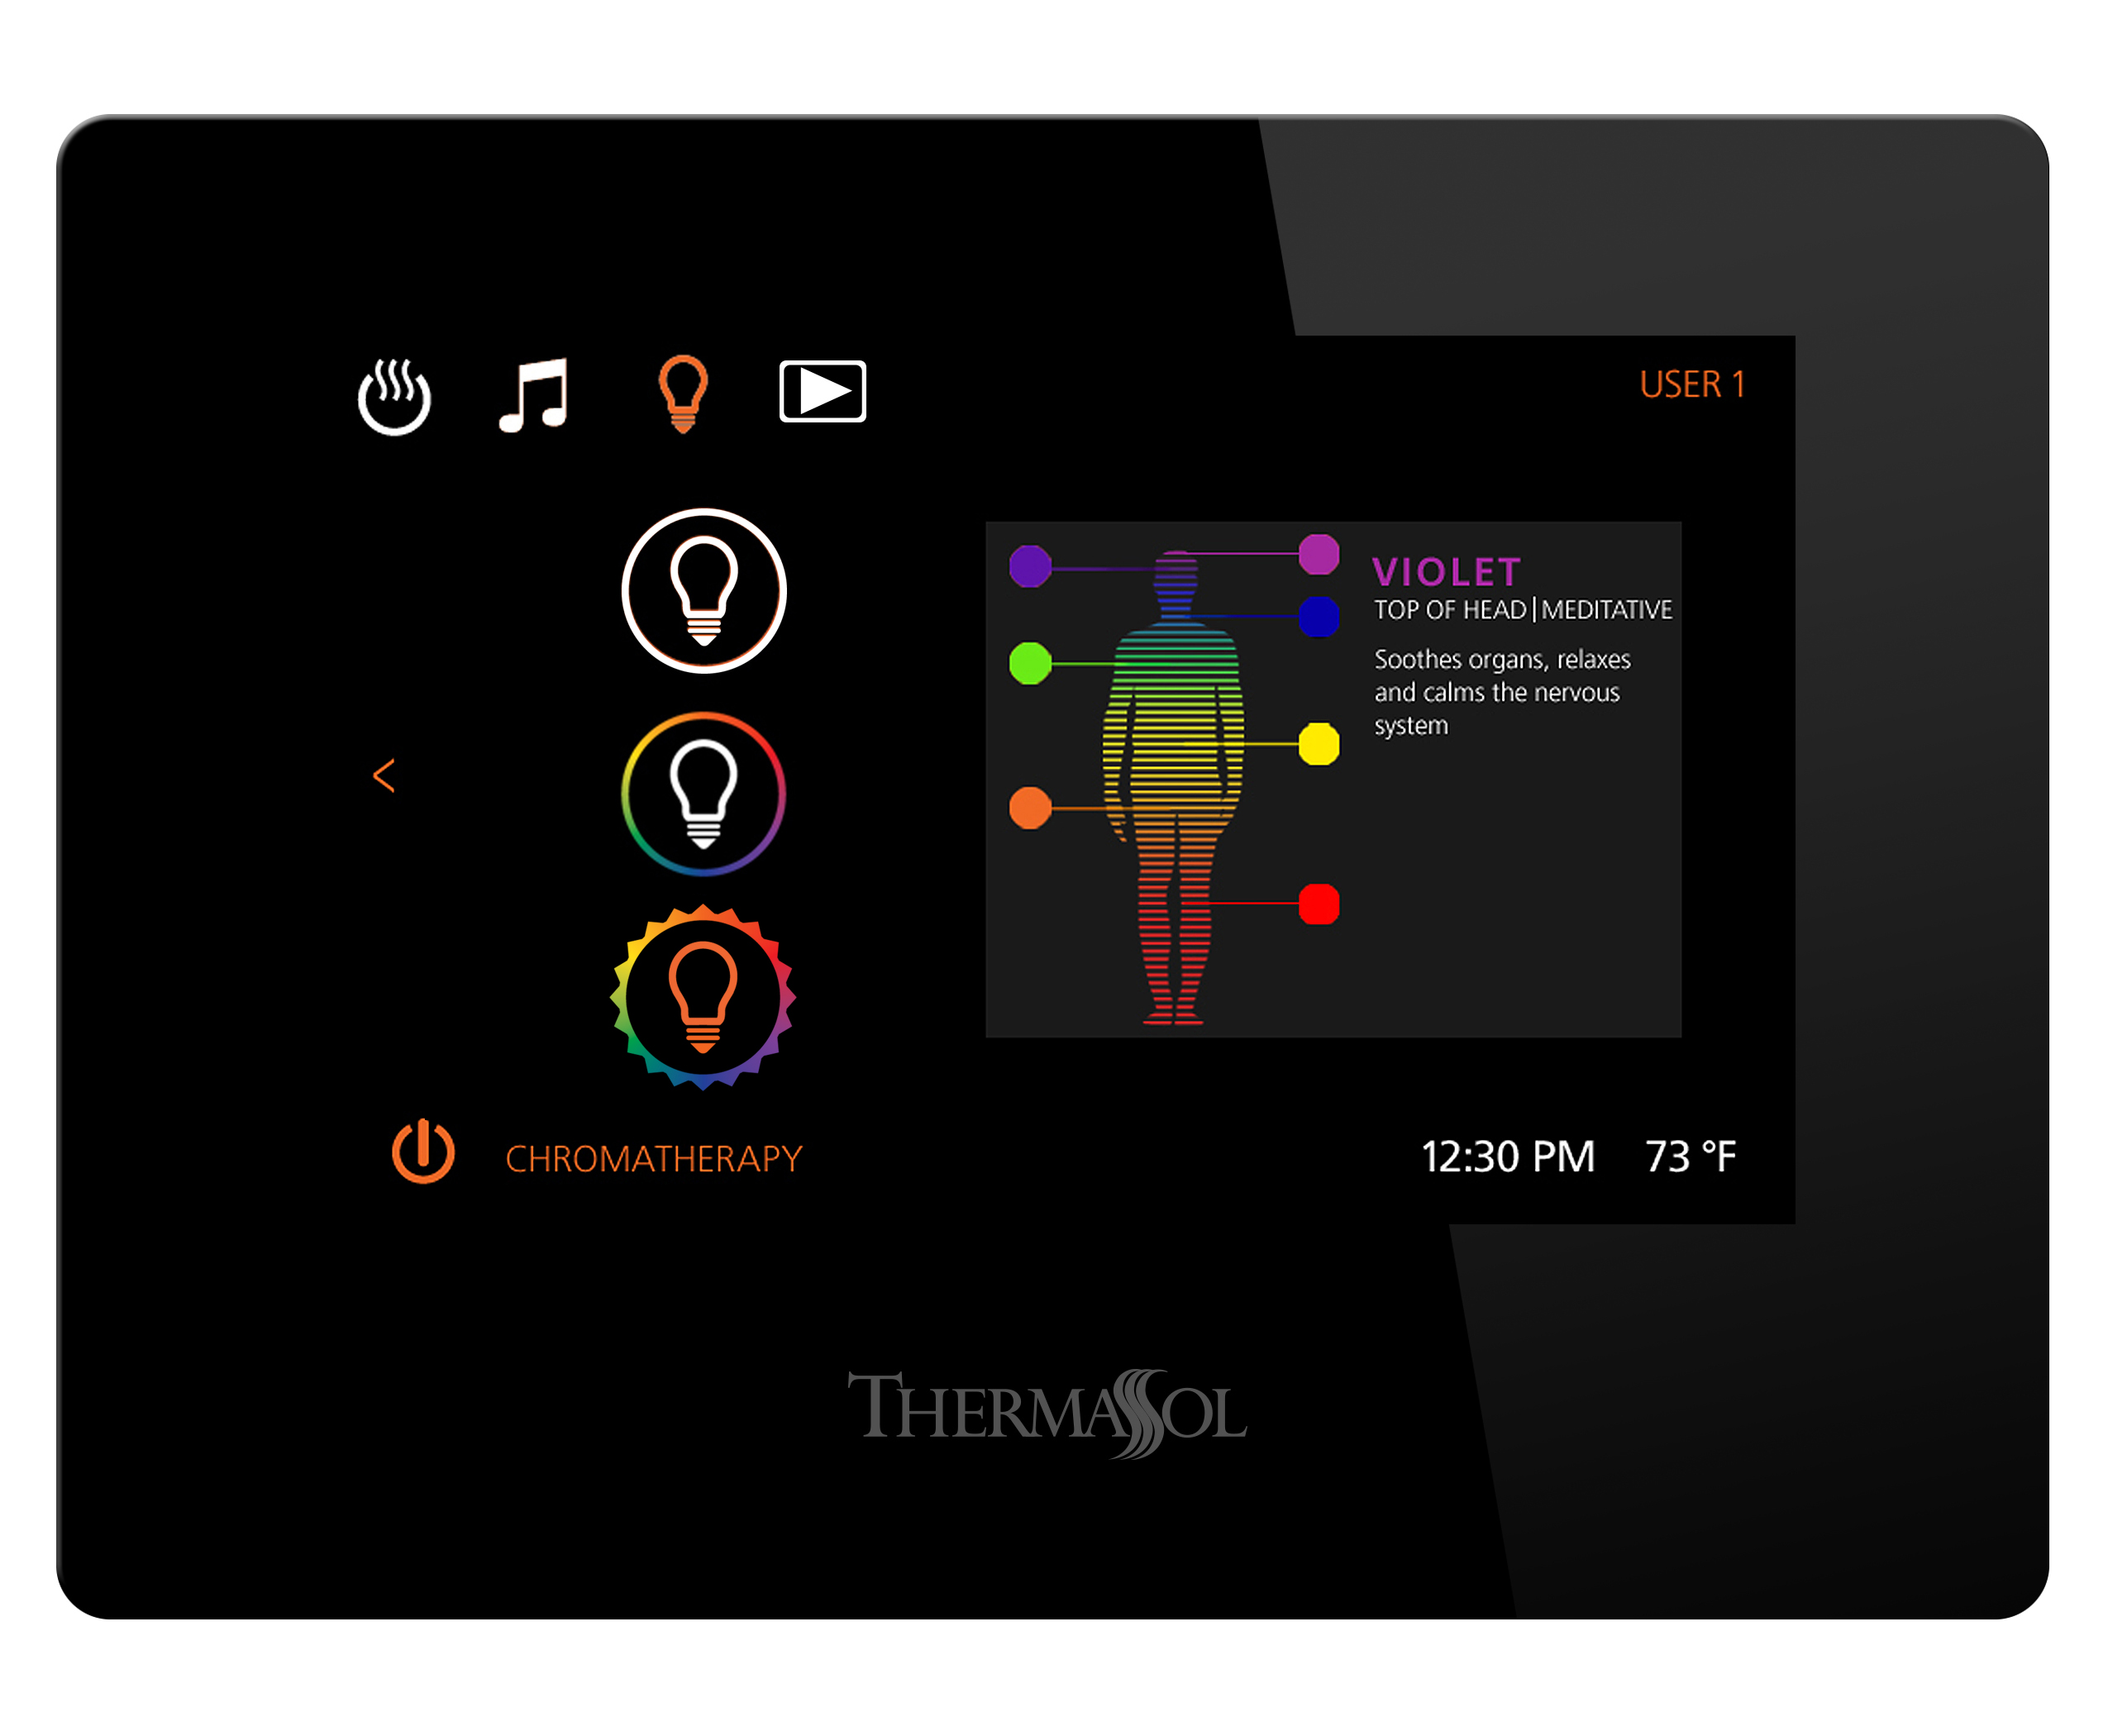 Users are able to control and benefit from ThermSol's ThermaTouch’s preset Chromatherapy mode which is based on chakras and holistic wellness practices.